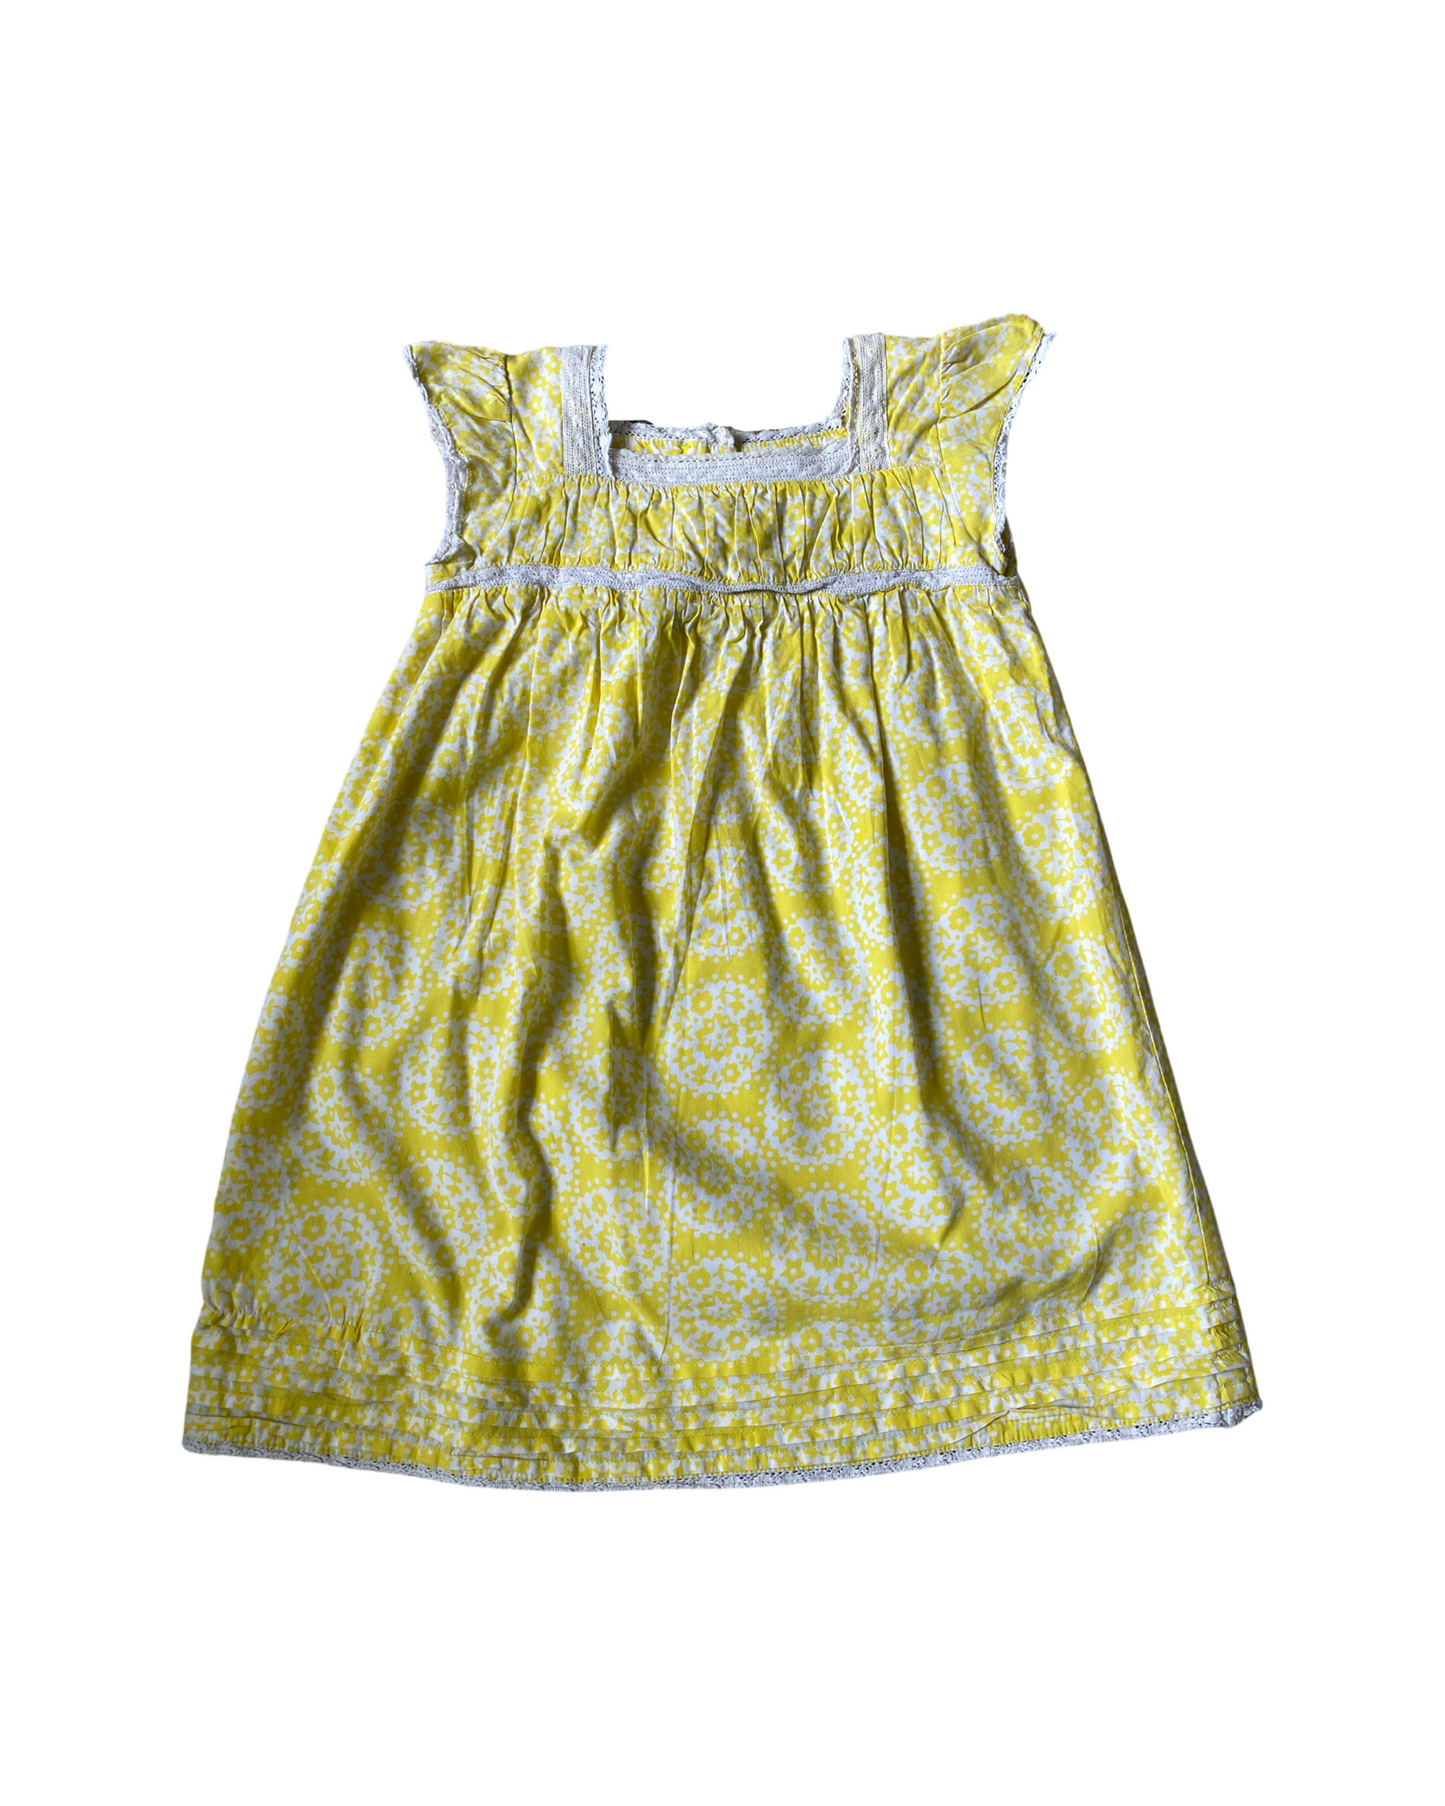 Baby Boden yellow floral cotton dress (size 2-3yrs)